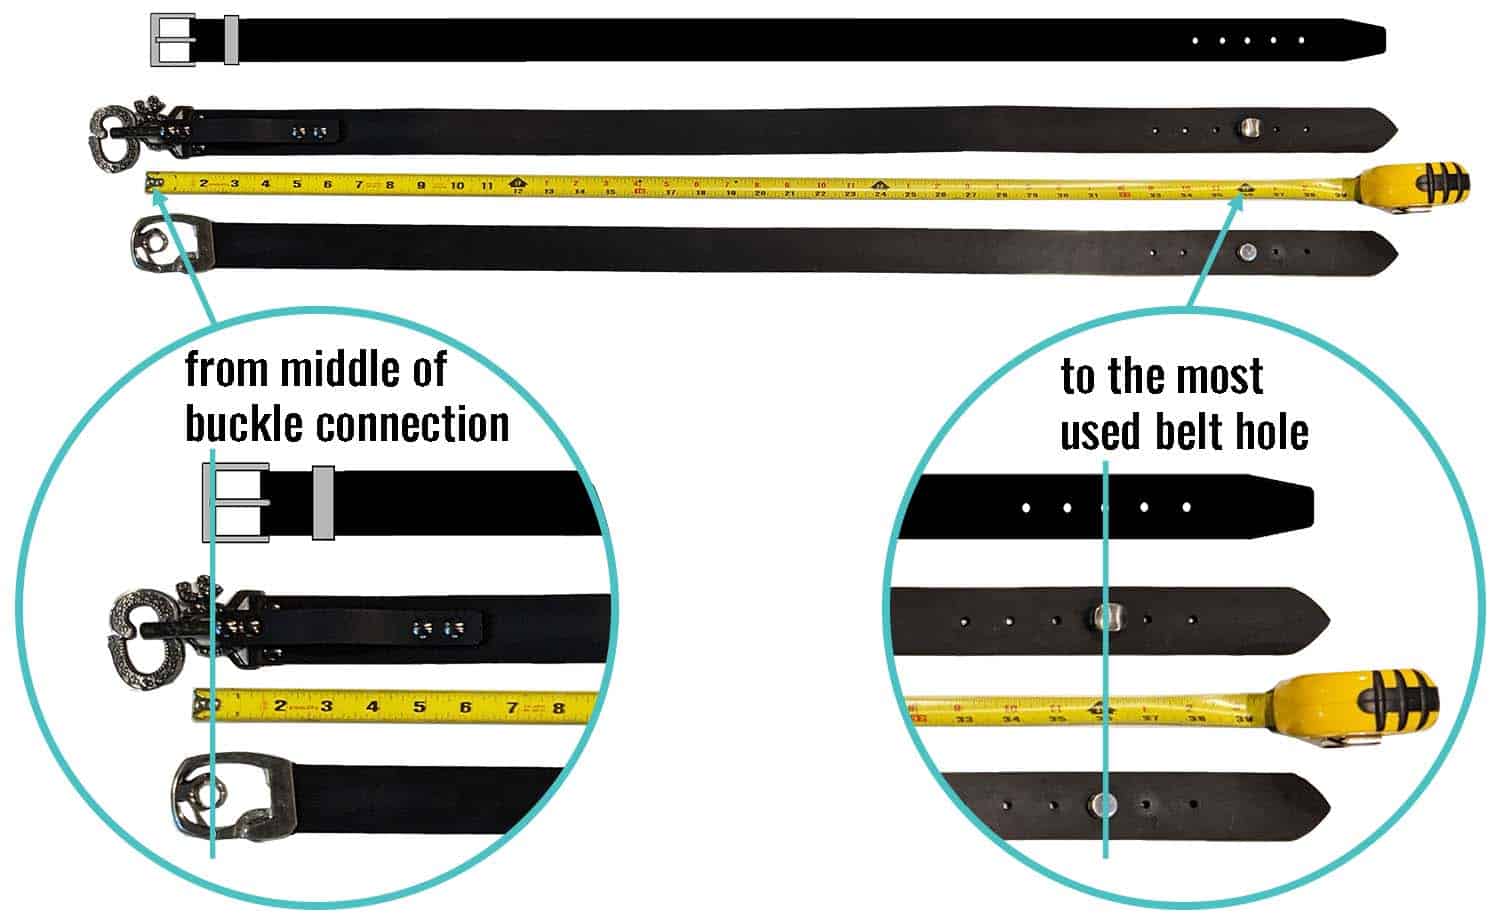 What Belt Size Do I Need? Easy Ways to Measure at Home